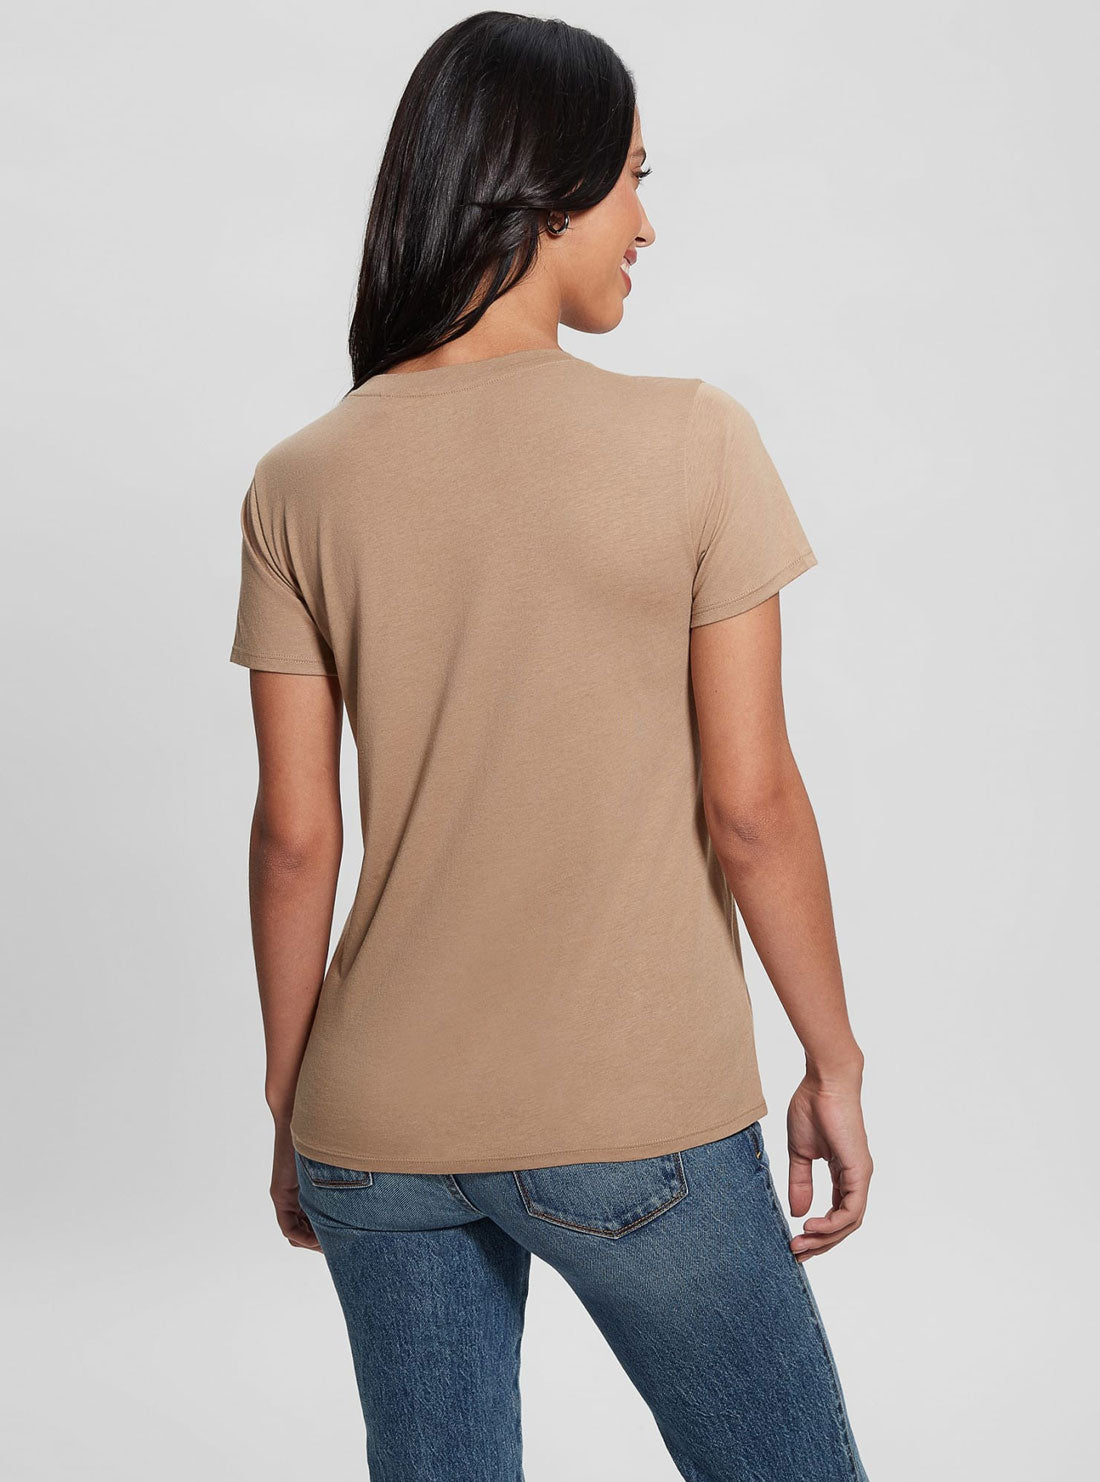 Tan Wolf Graphic T-Shirt | GUESS Women's Apparel | back view